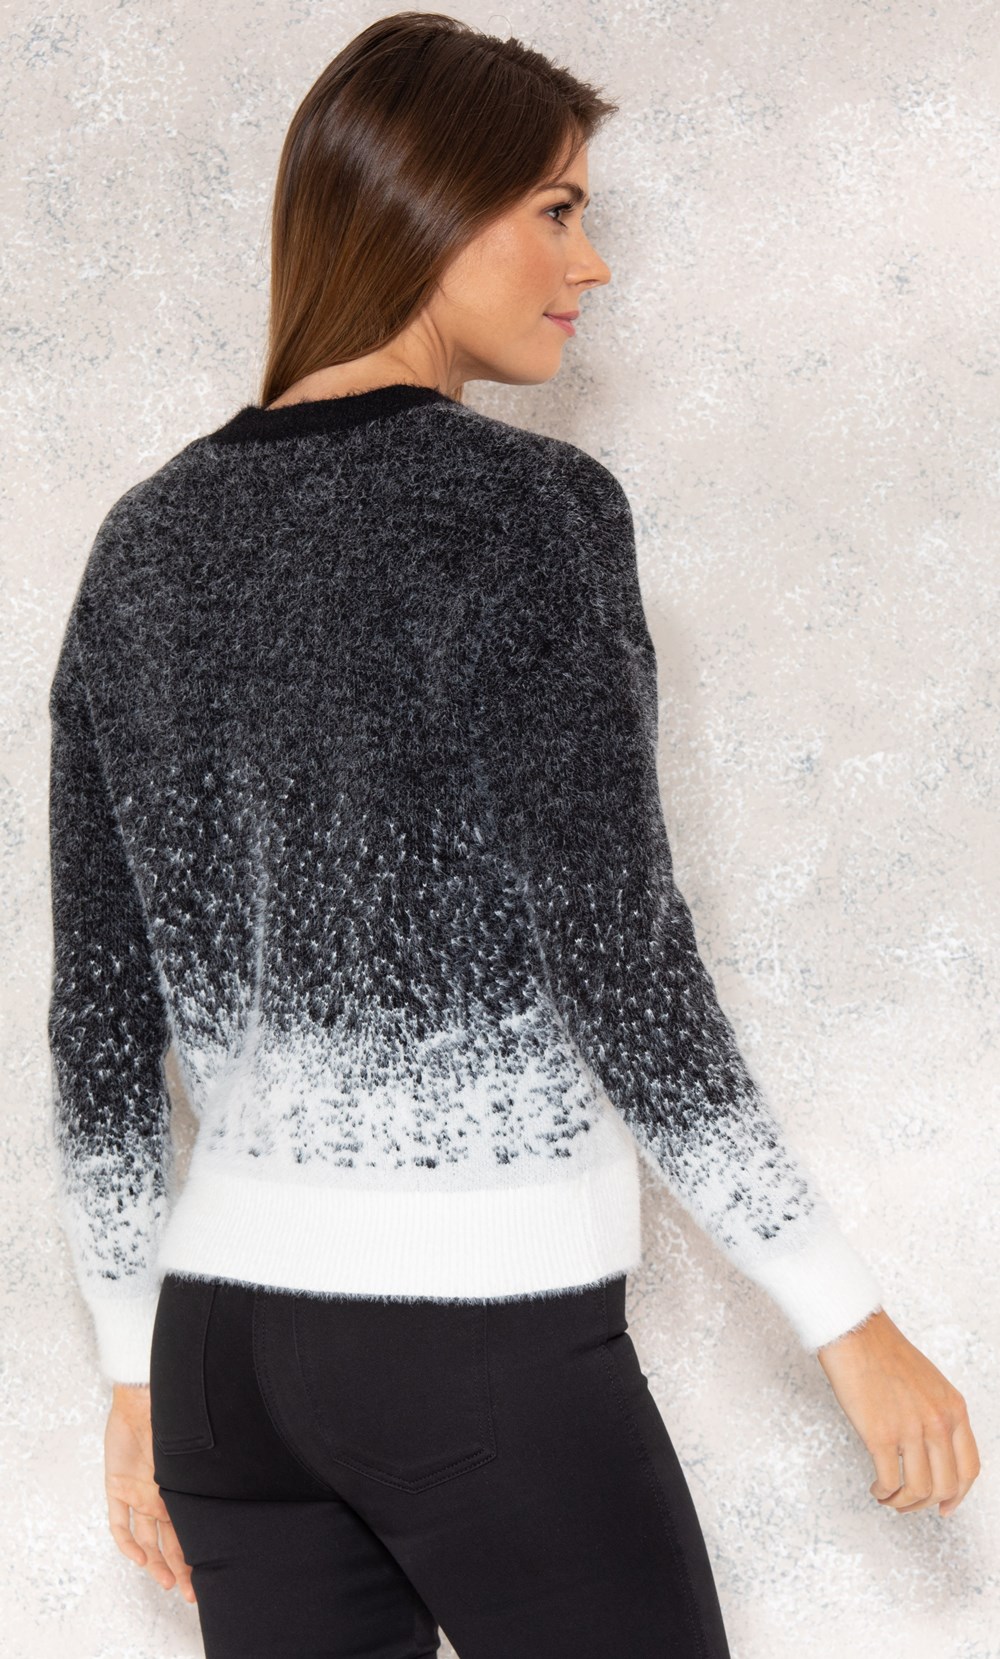 Snowflake Knitted Top